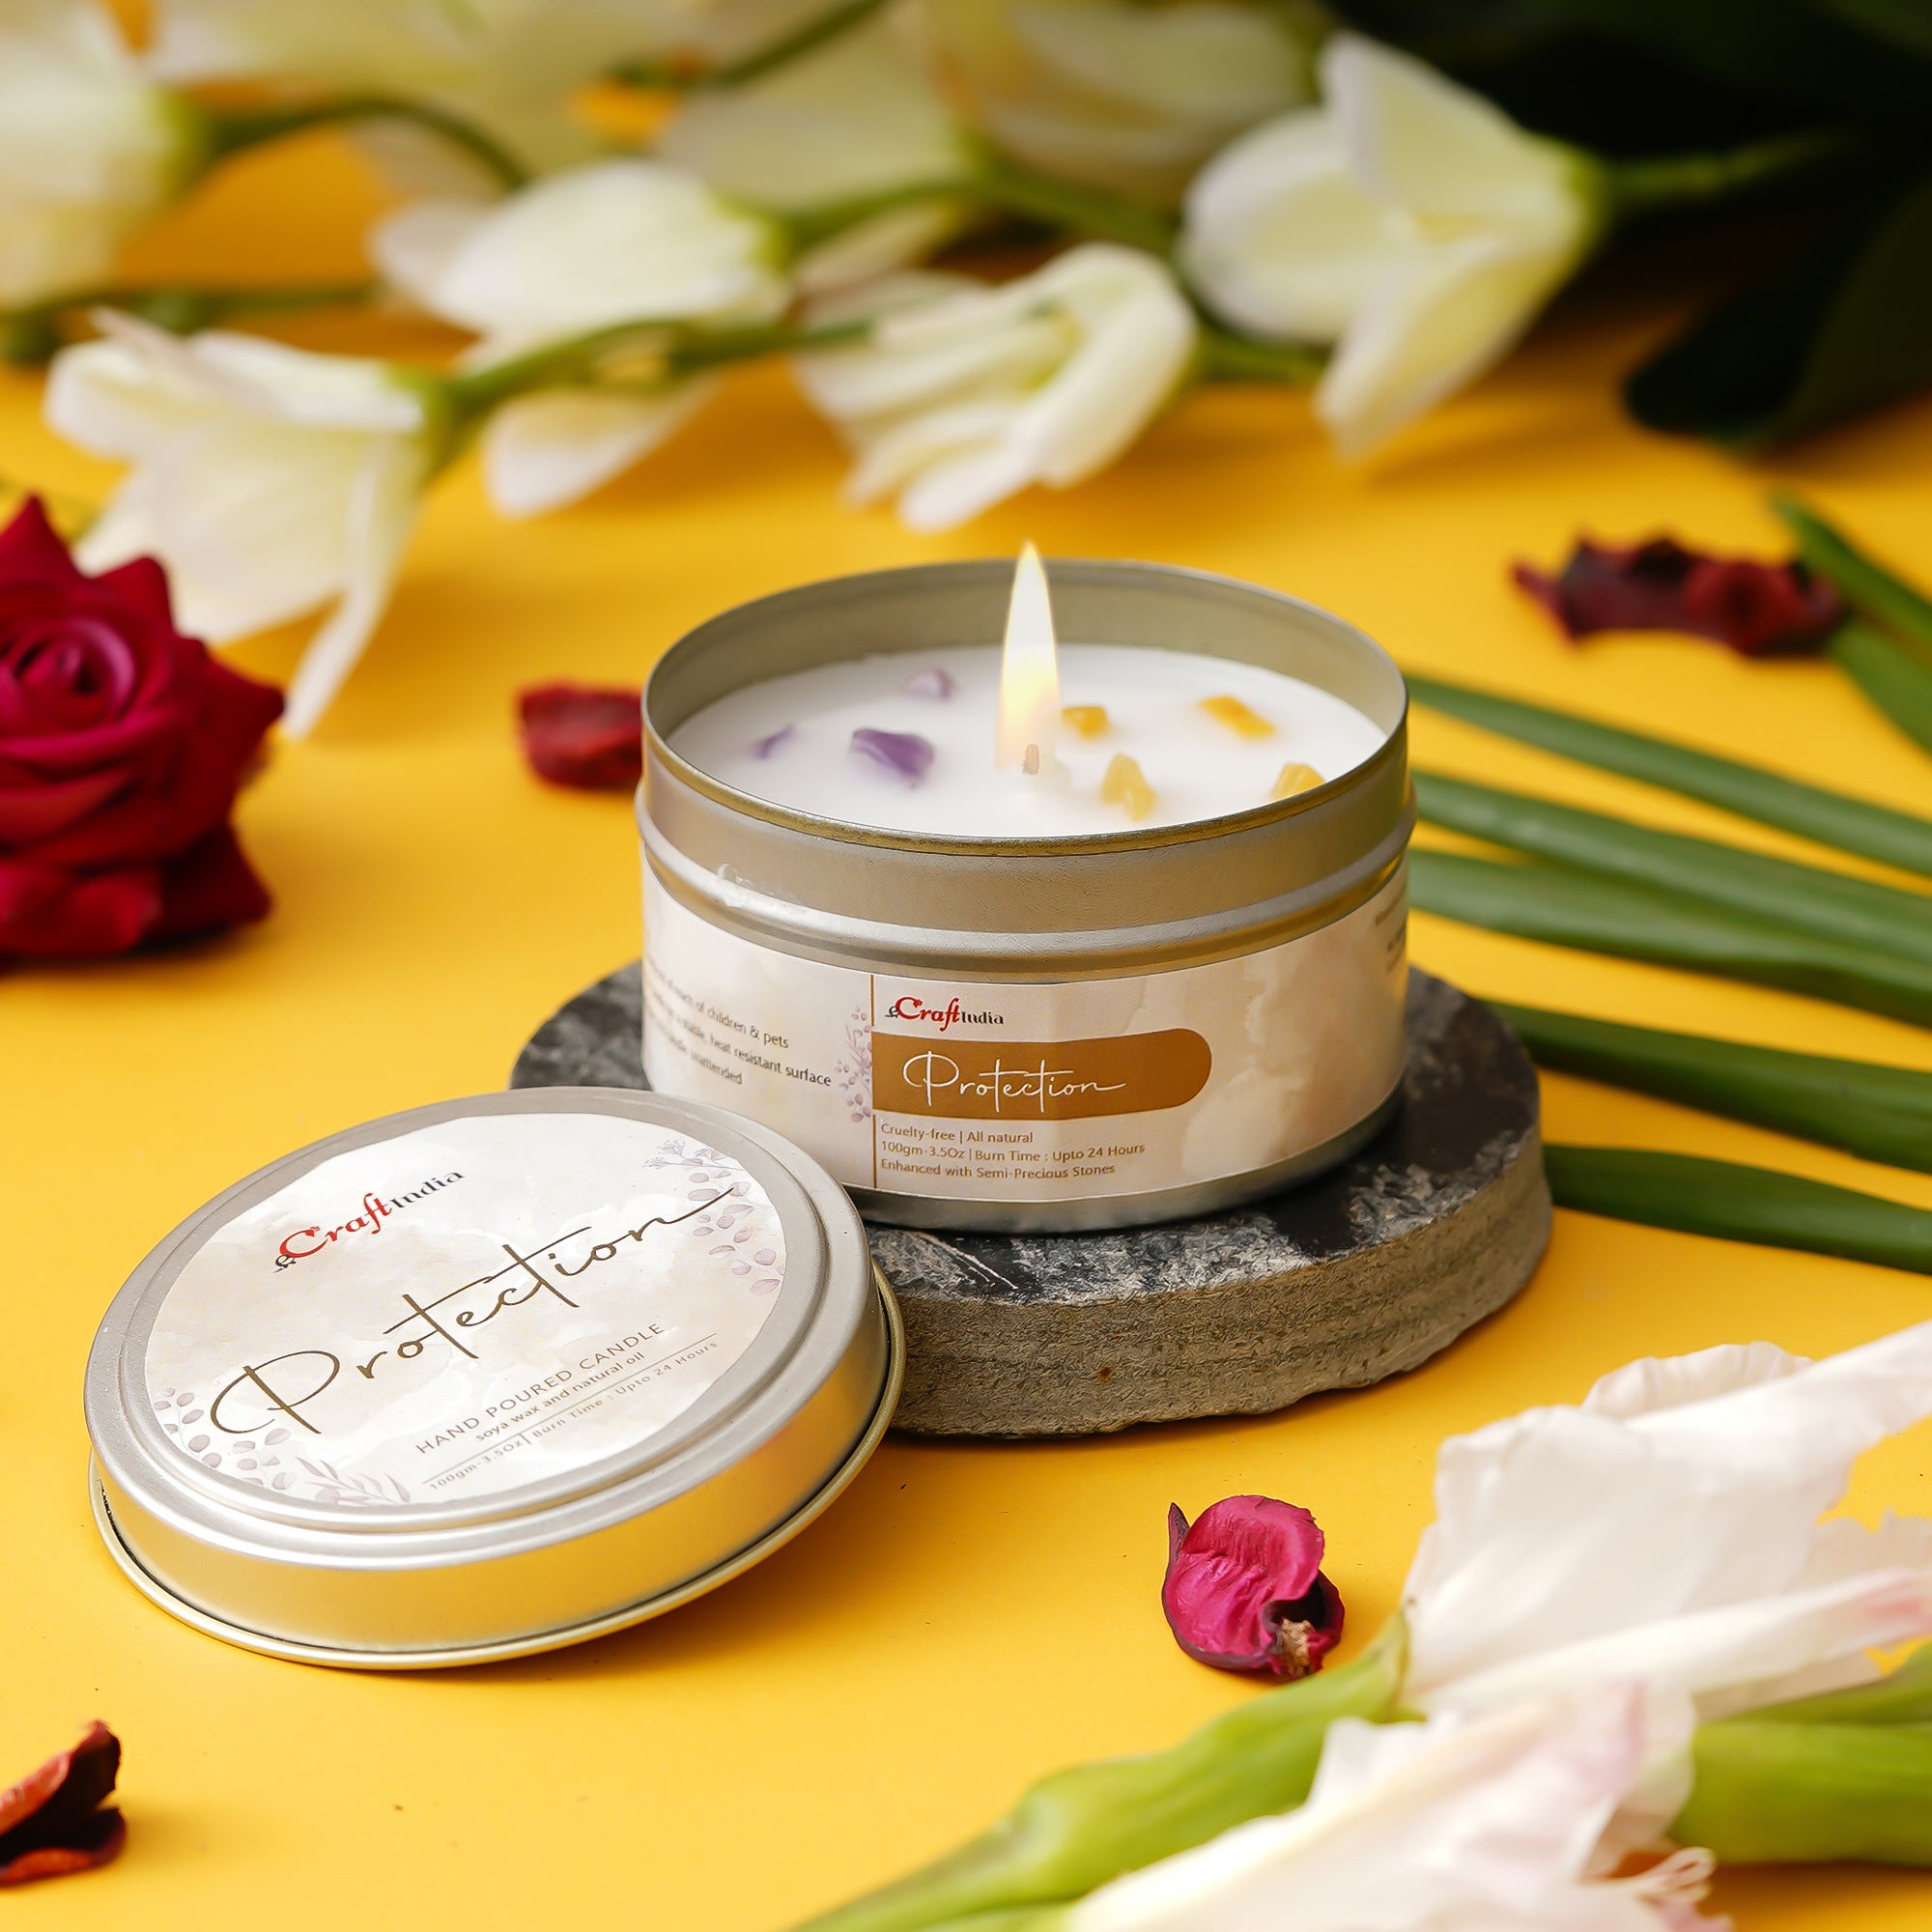 eCraftIndia The Scented Gift Box - Set of 3 Jars Super Calm, Lemon Grass, Protection Hand Poured Soya Wax Candles 5